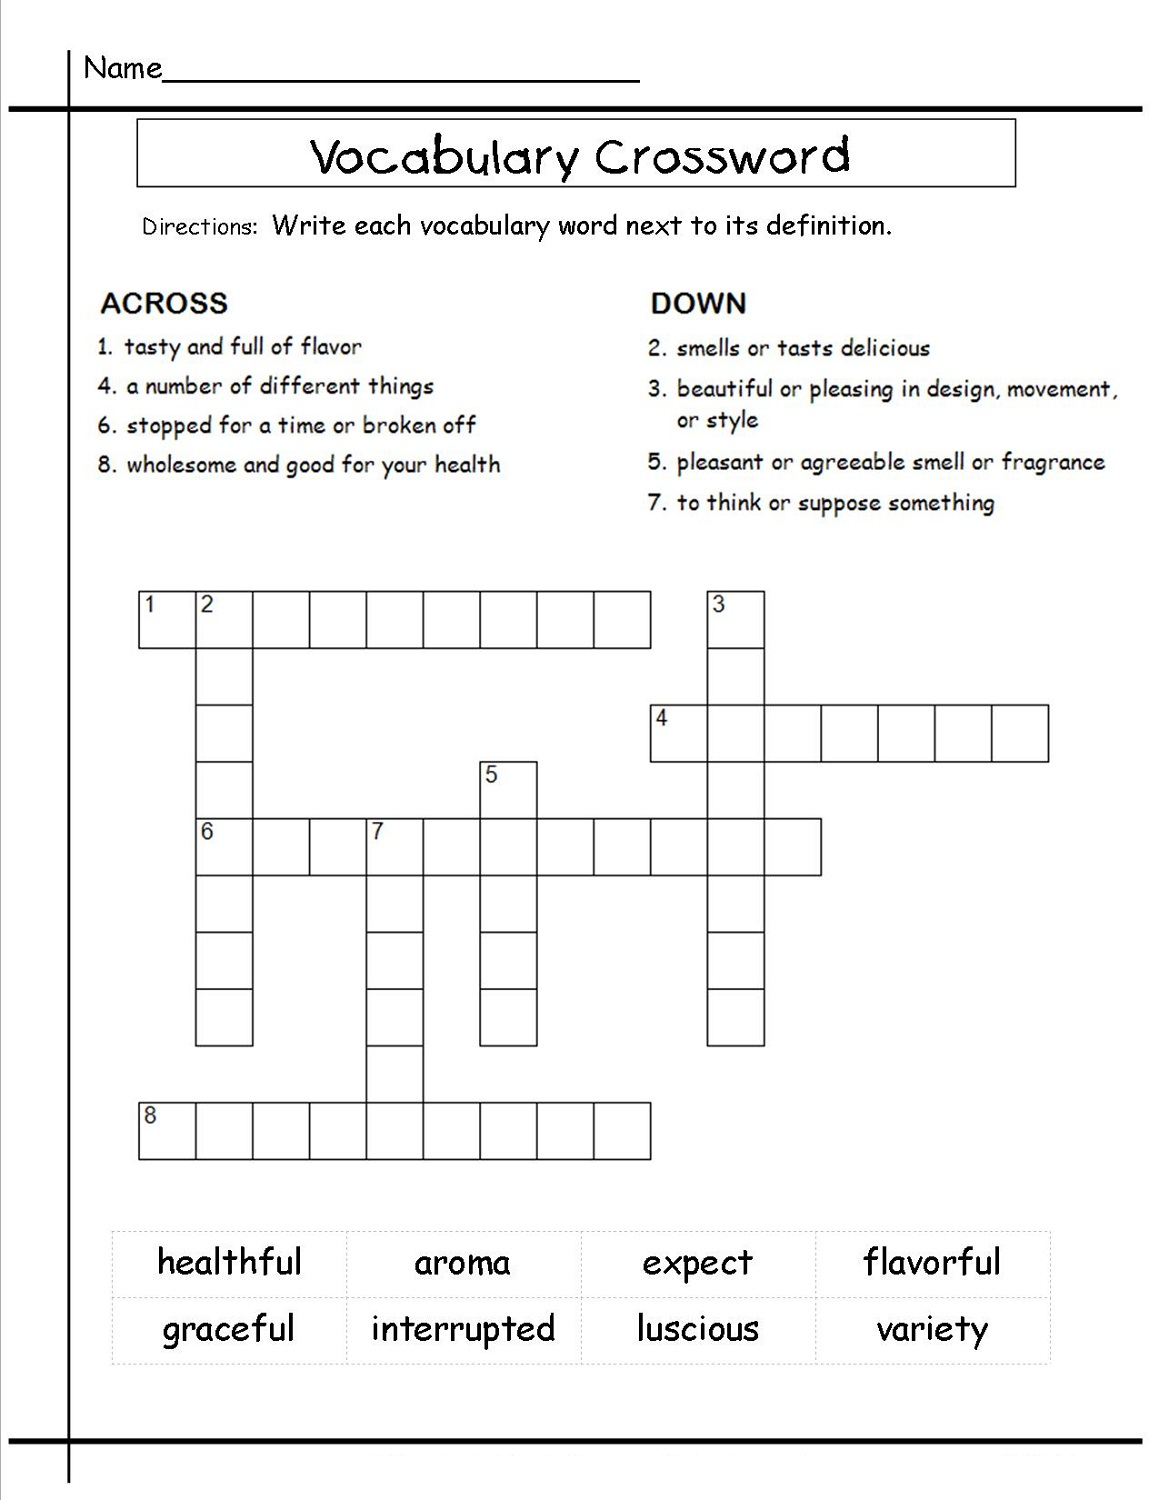 Crossword Puzzles For 5Th Graders | Activity Shelter - Printable Crossword Puzzles 5Th Grade